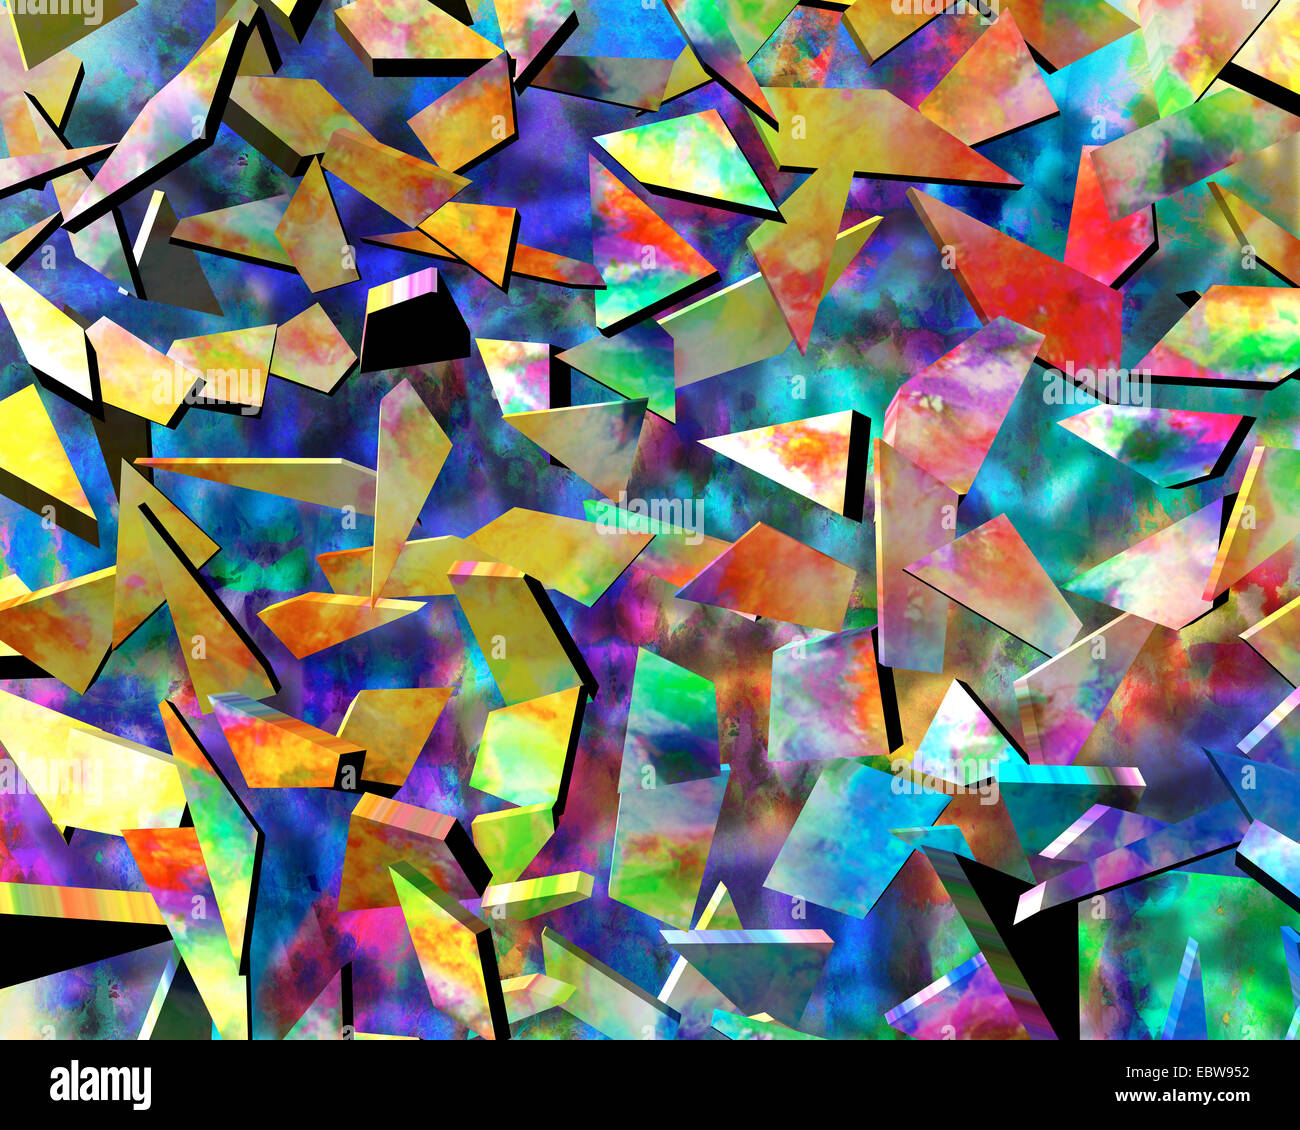 Digital Art High Resolution Stock Photography and Images - Alamy